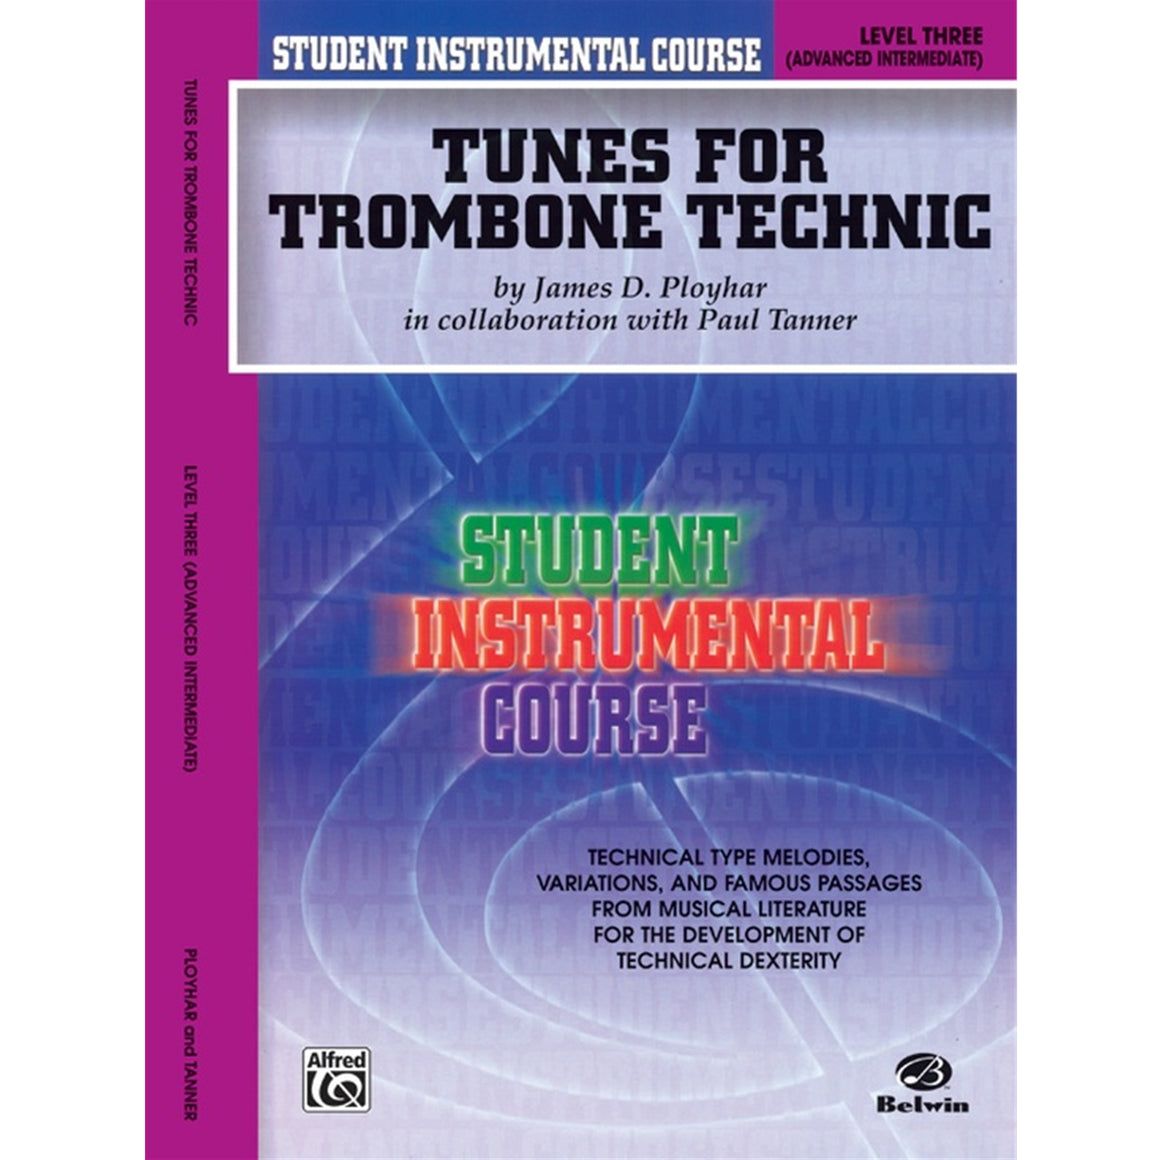 ALFRED 00BIC00358A Student Instrumental Course: Tunes for Trombone Technic, Level III [Trombone]